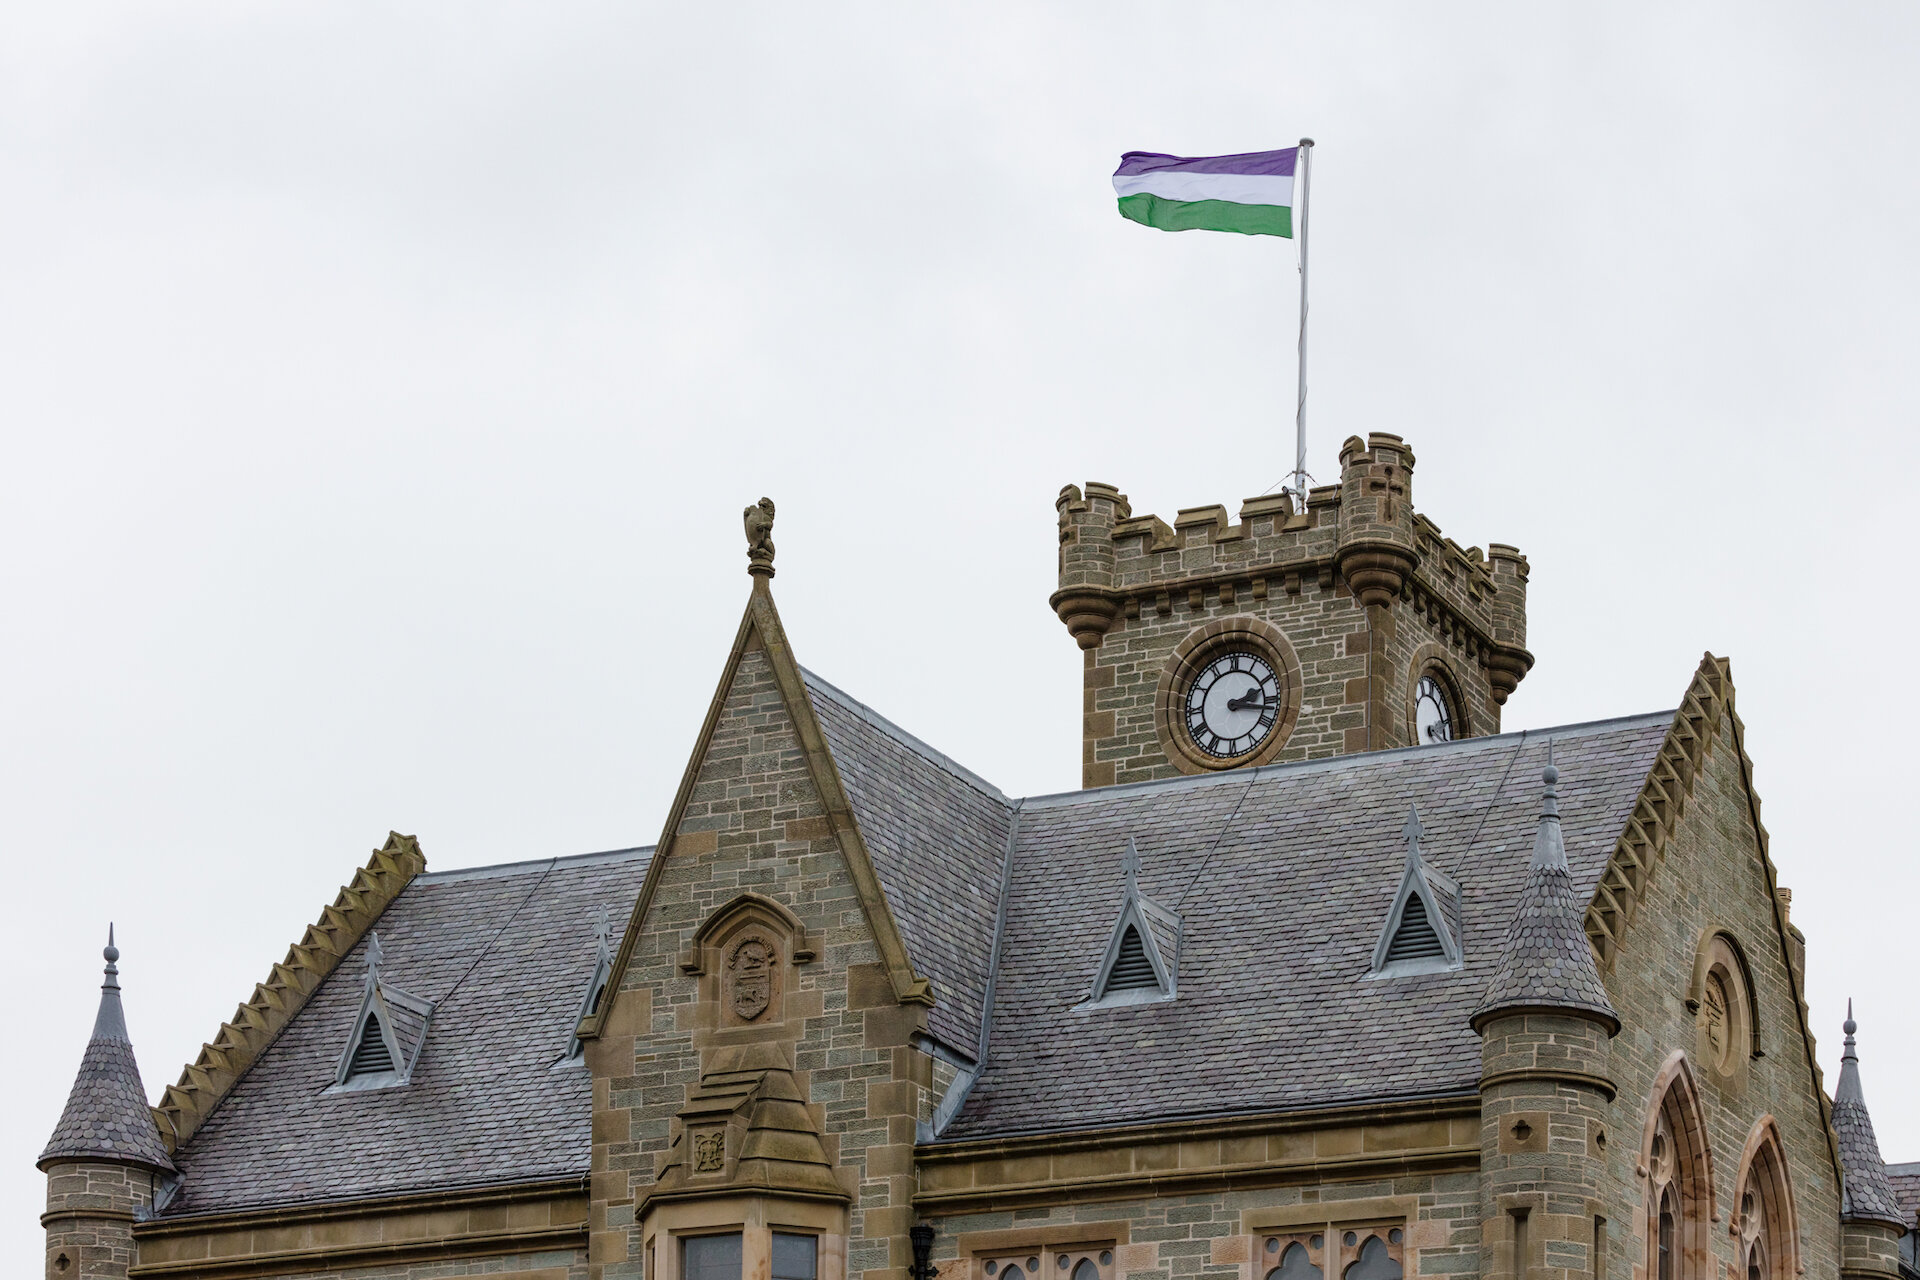 Suffragette flag flying above Lerwick Town Hall for International Women's Day 2018